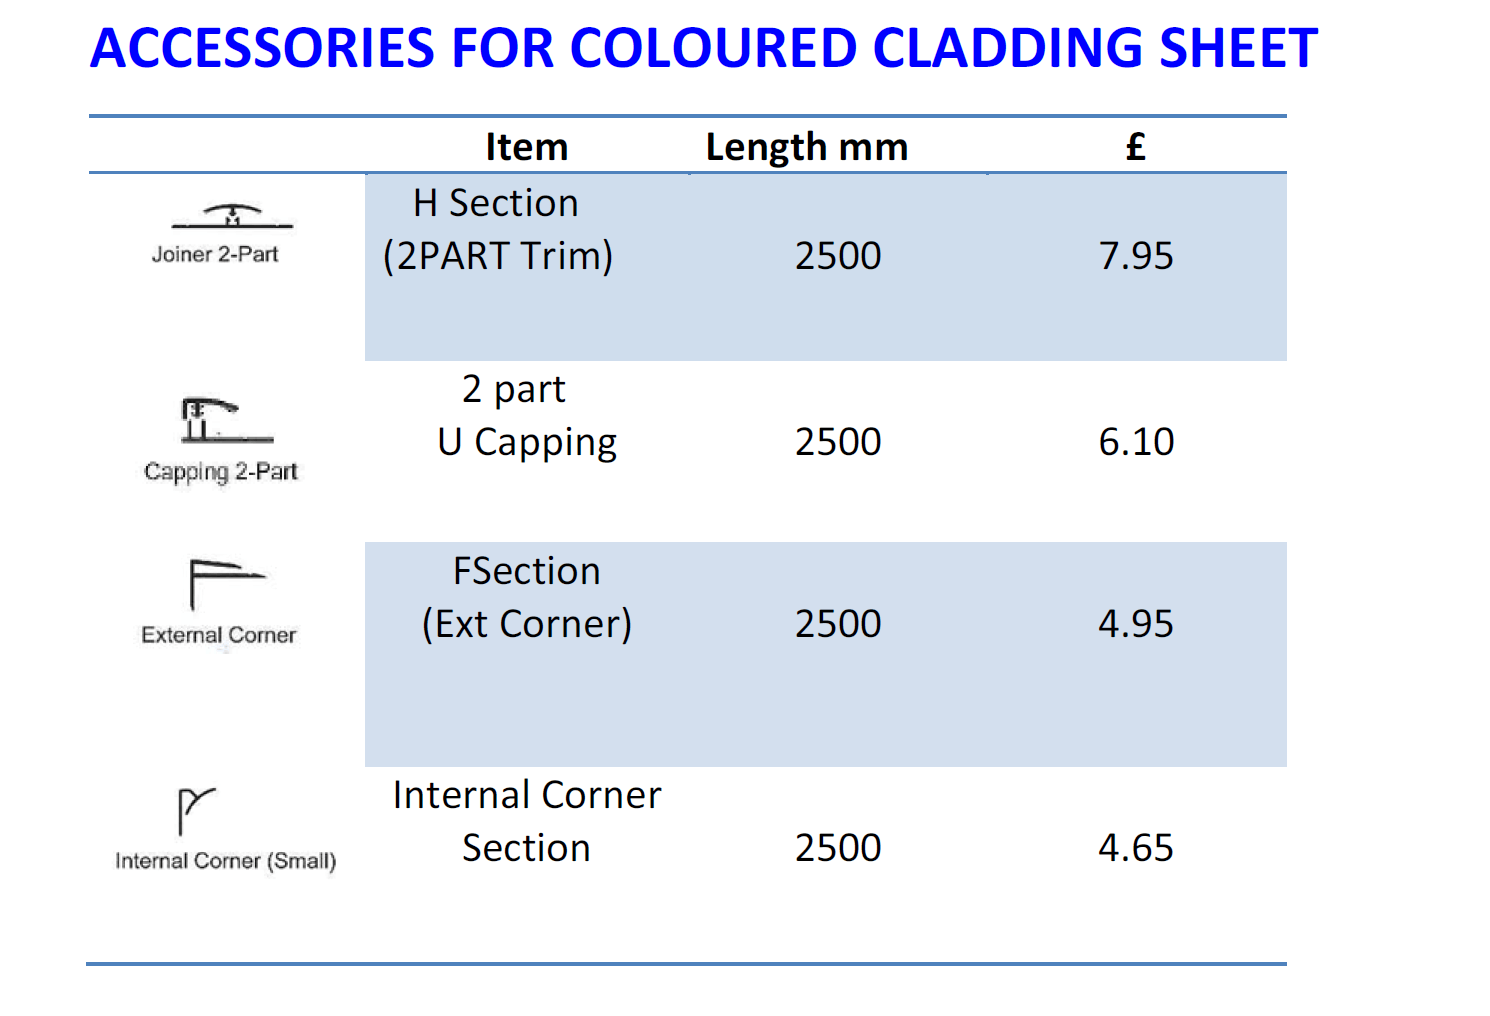 Accessories for Coloured Cladding Sheet